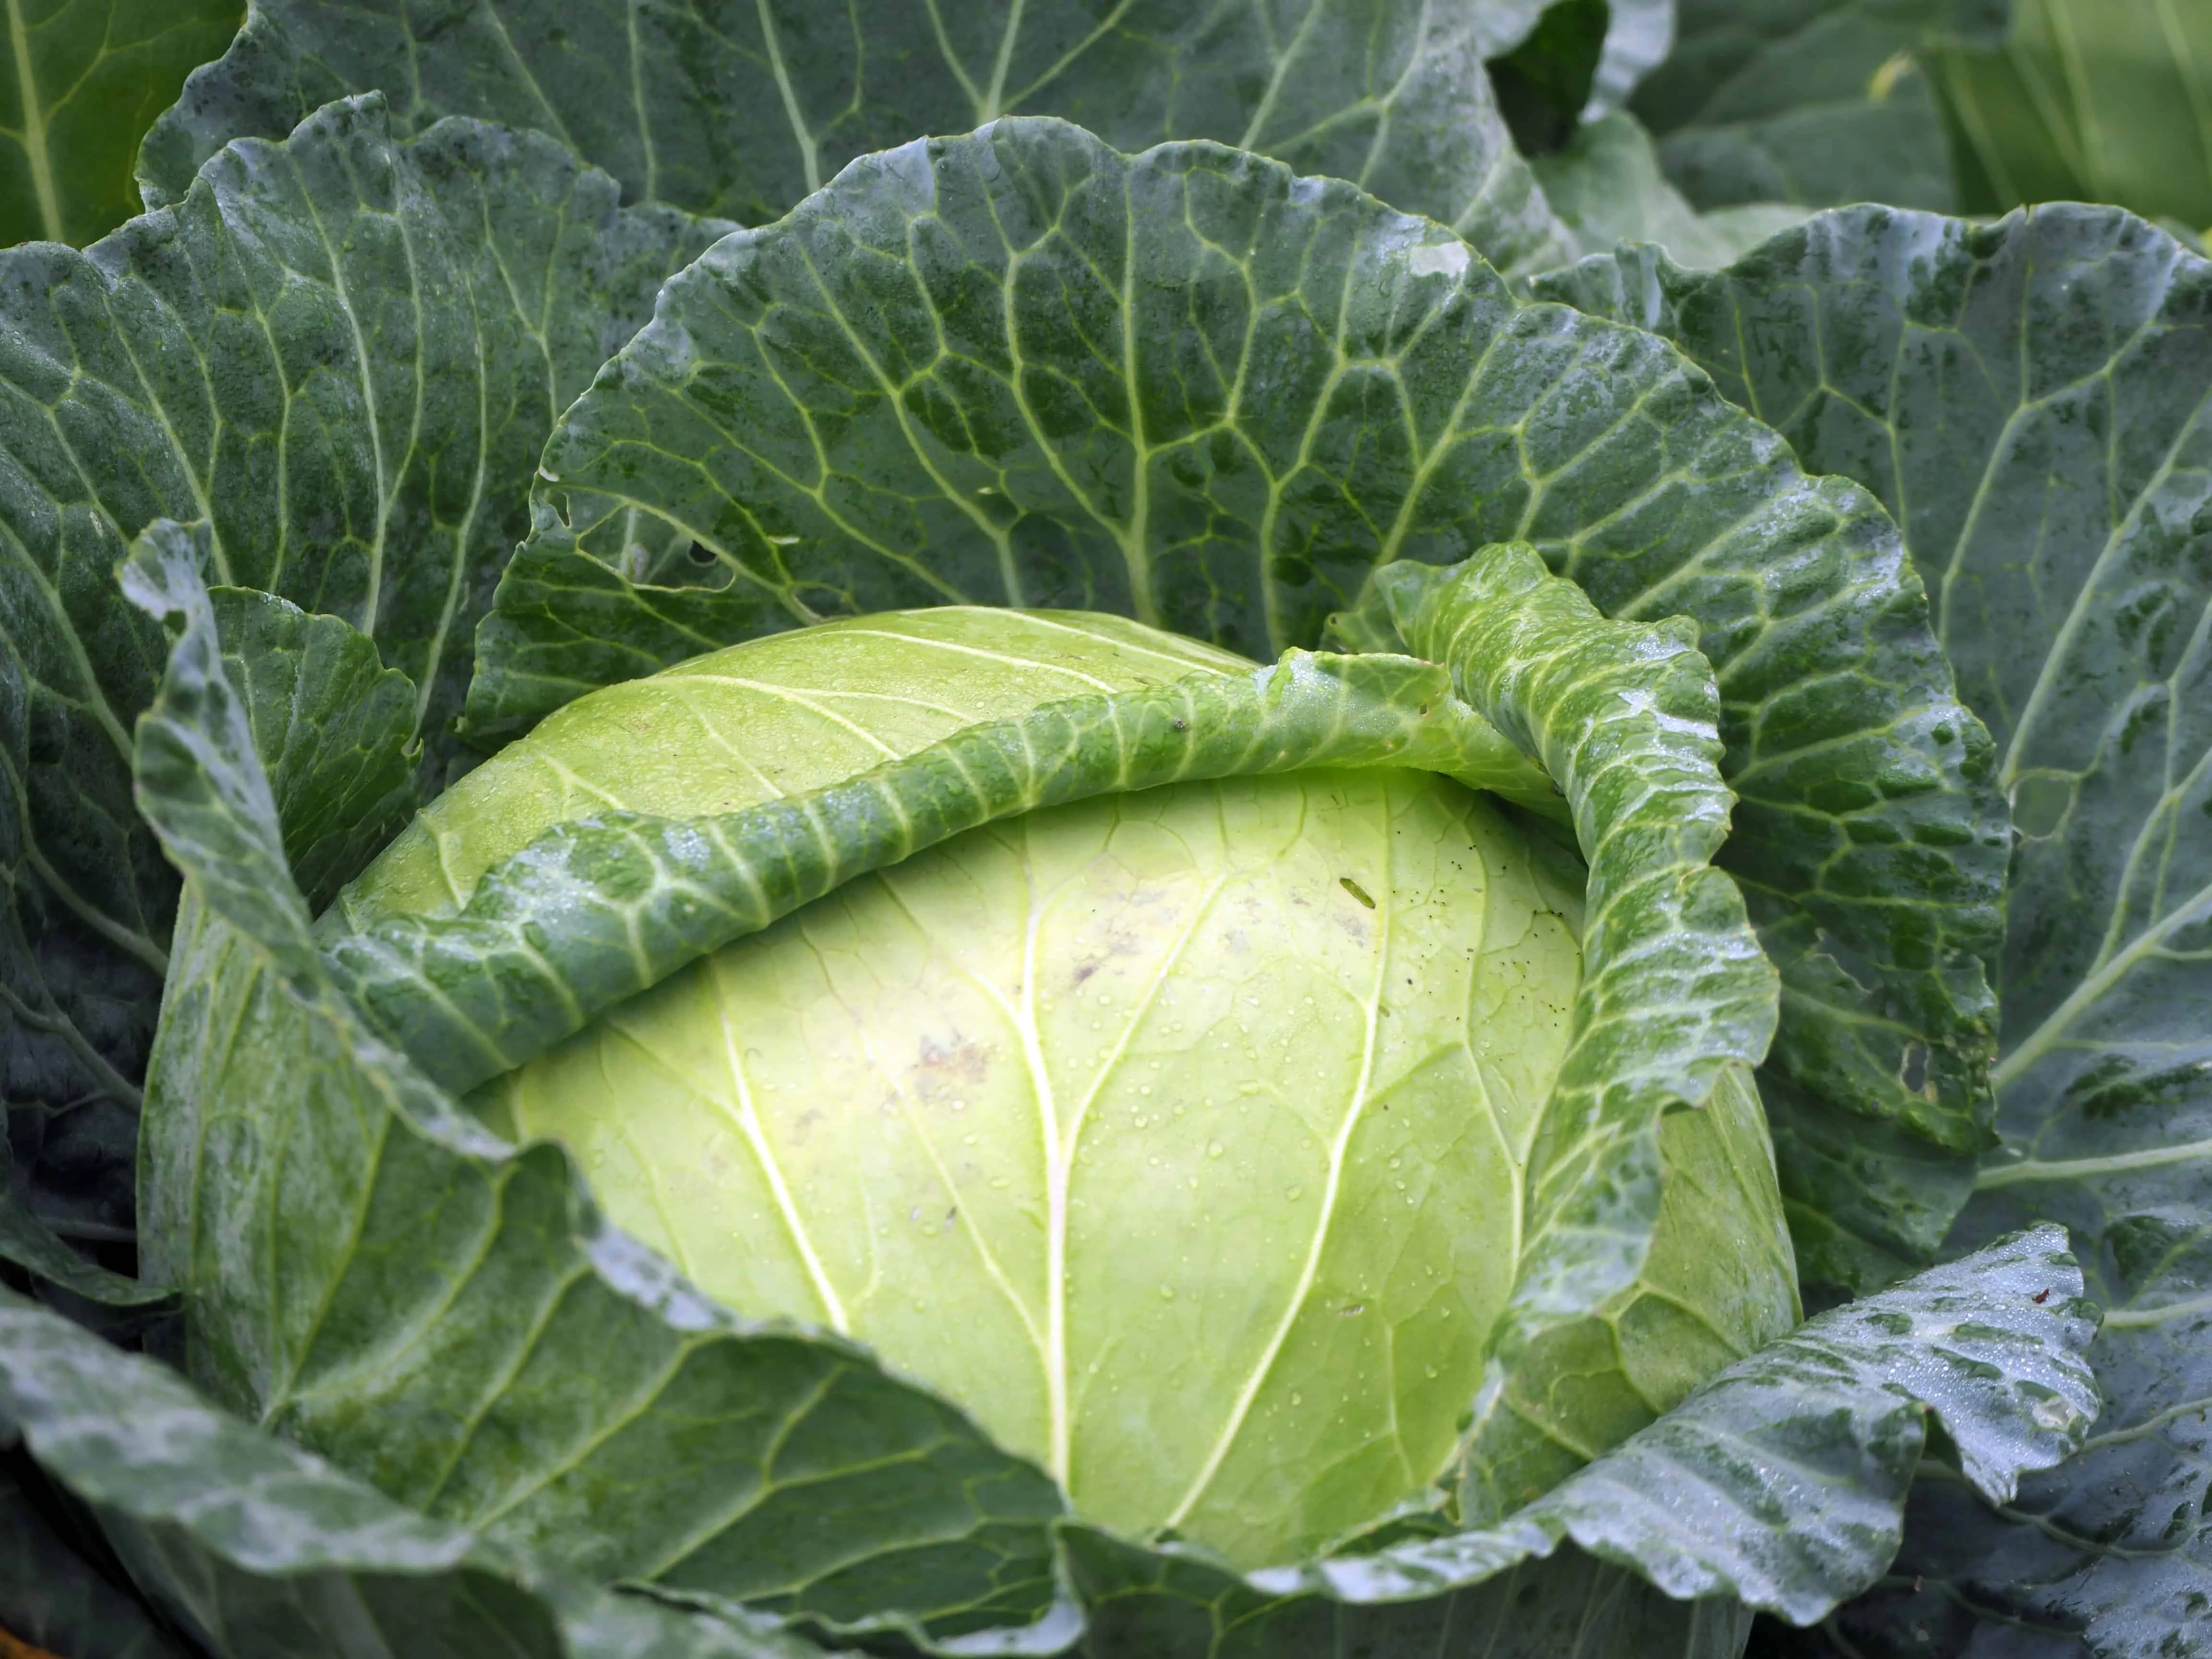 a whole green cabbage